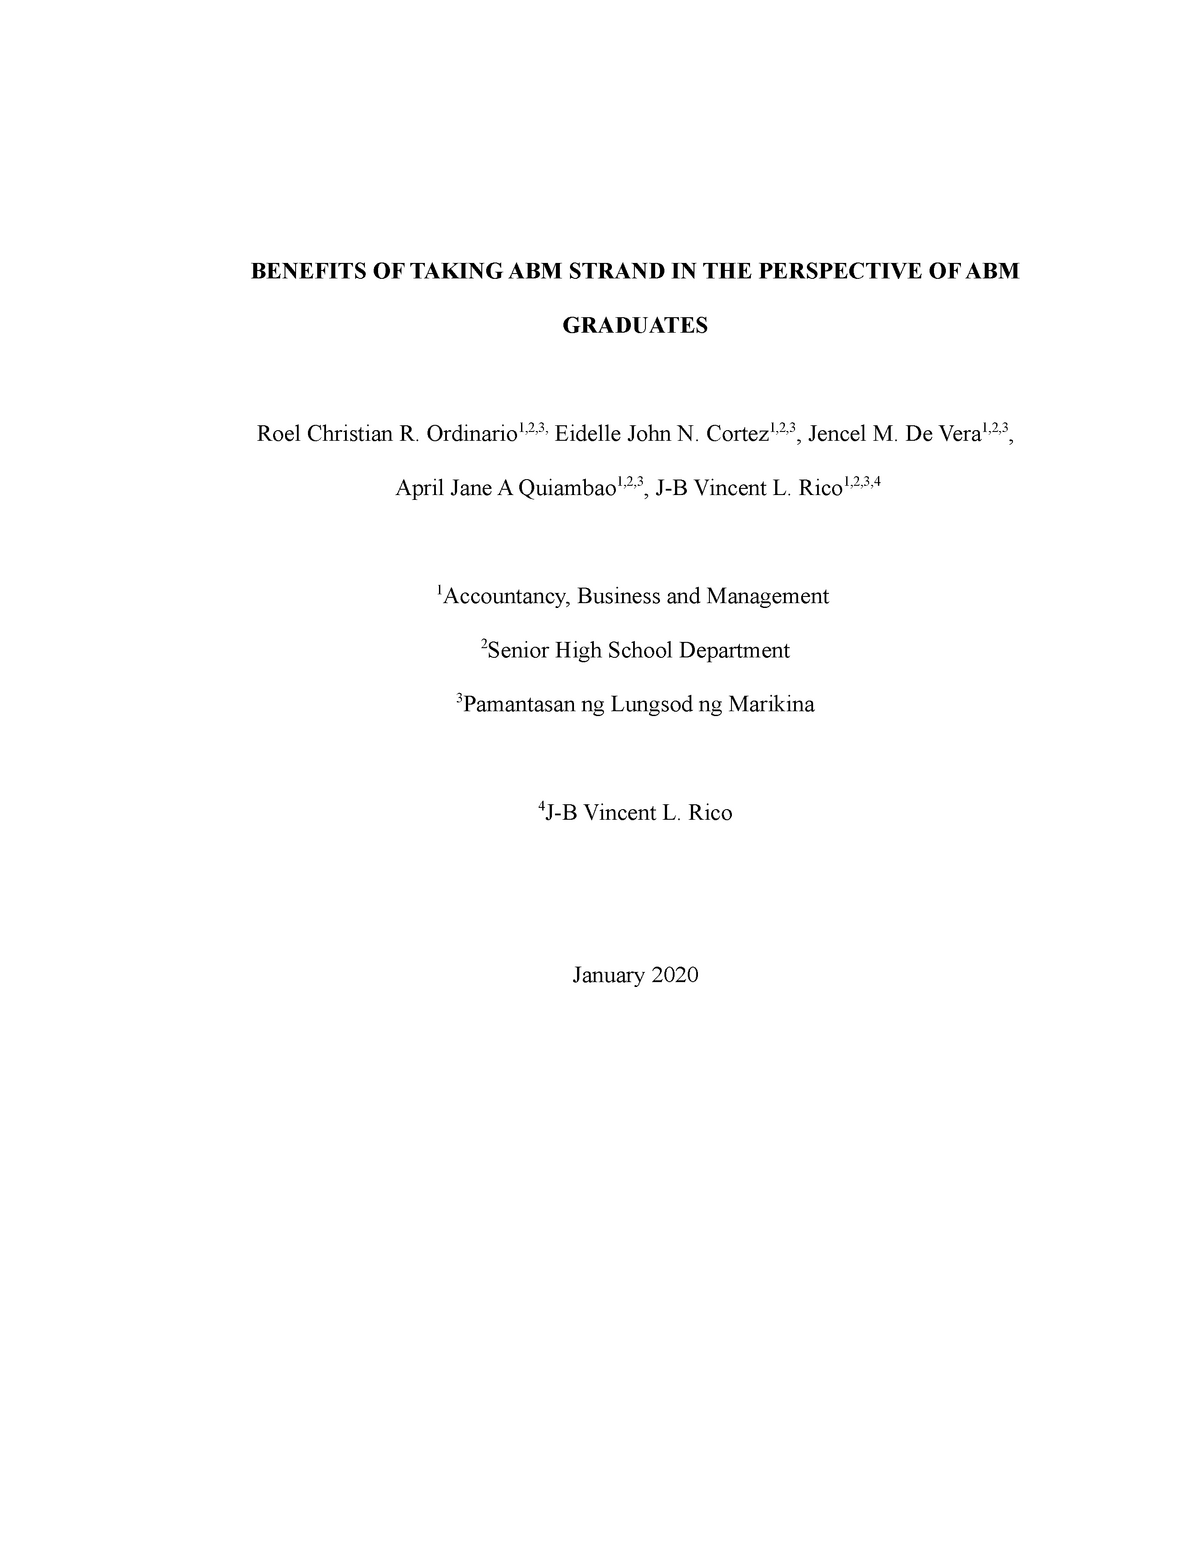 research title qualitative about students